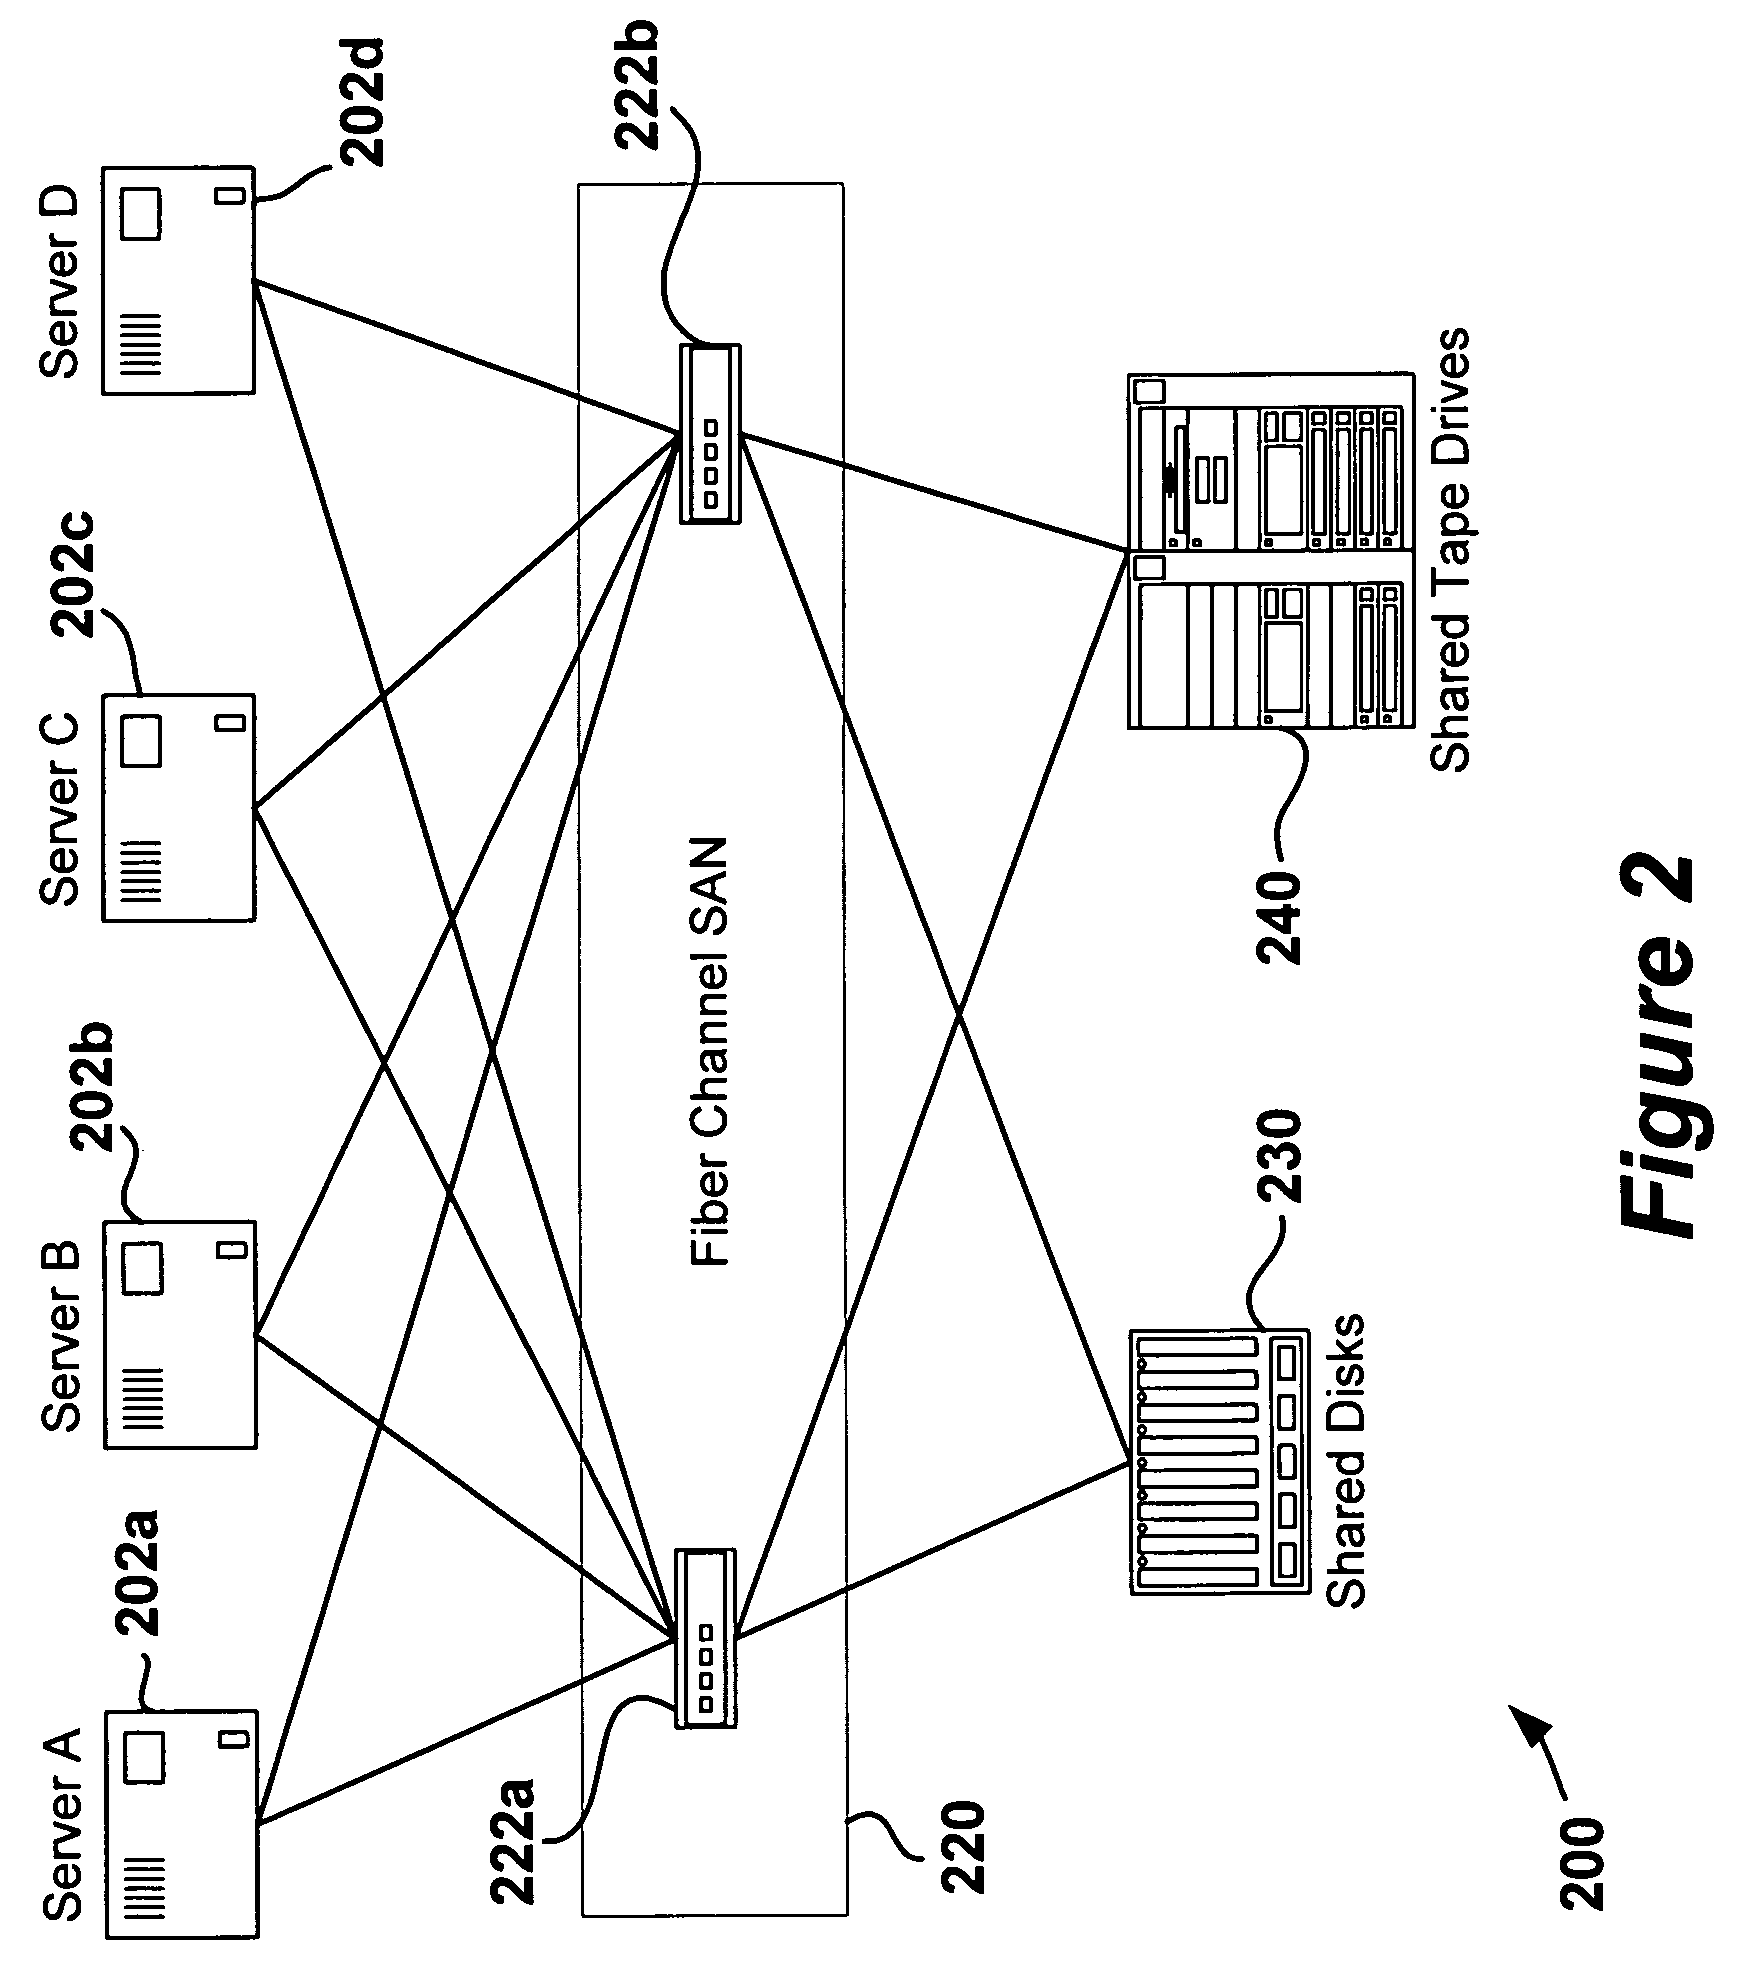 Distributed failover aware storage area network backup of application data in an active-N high availability cluster